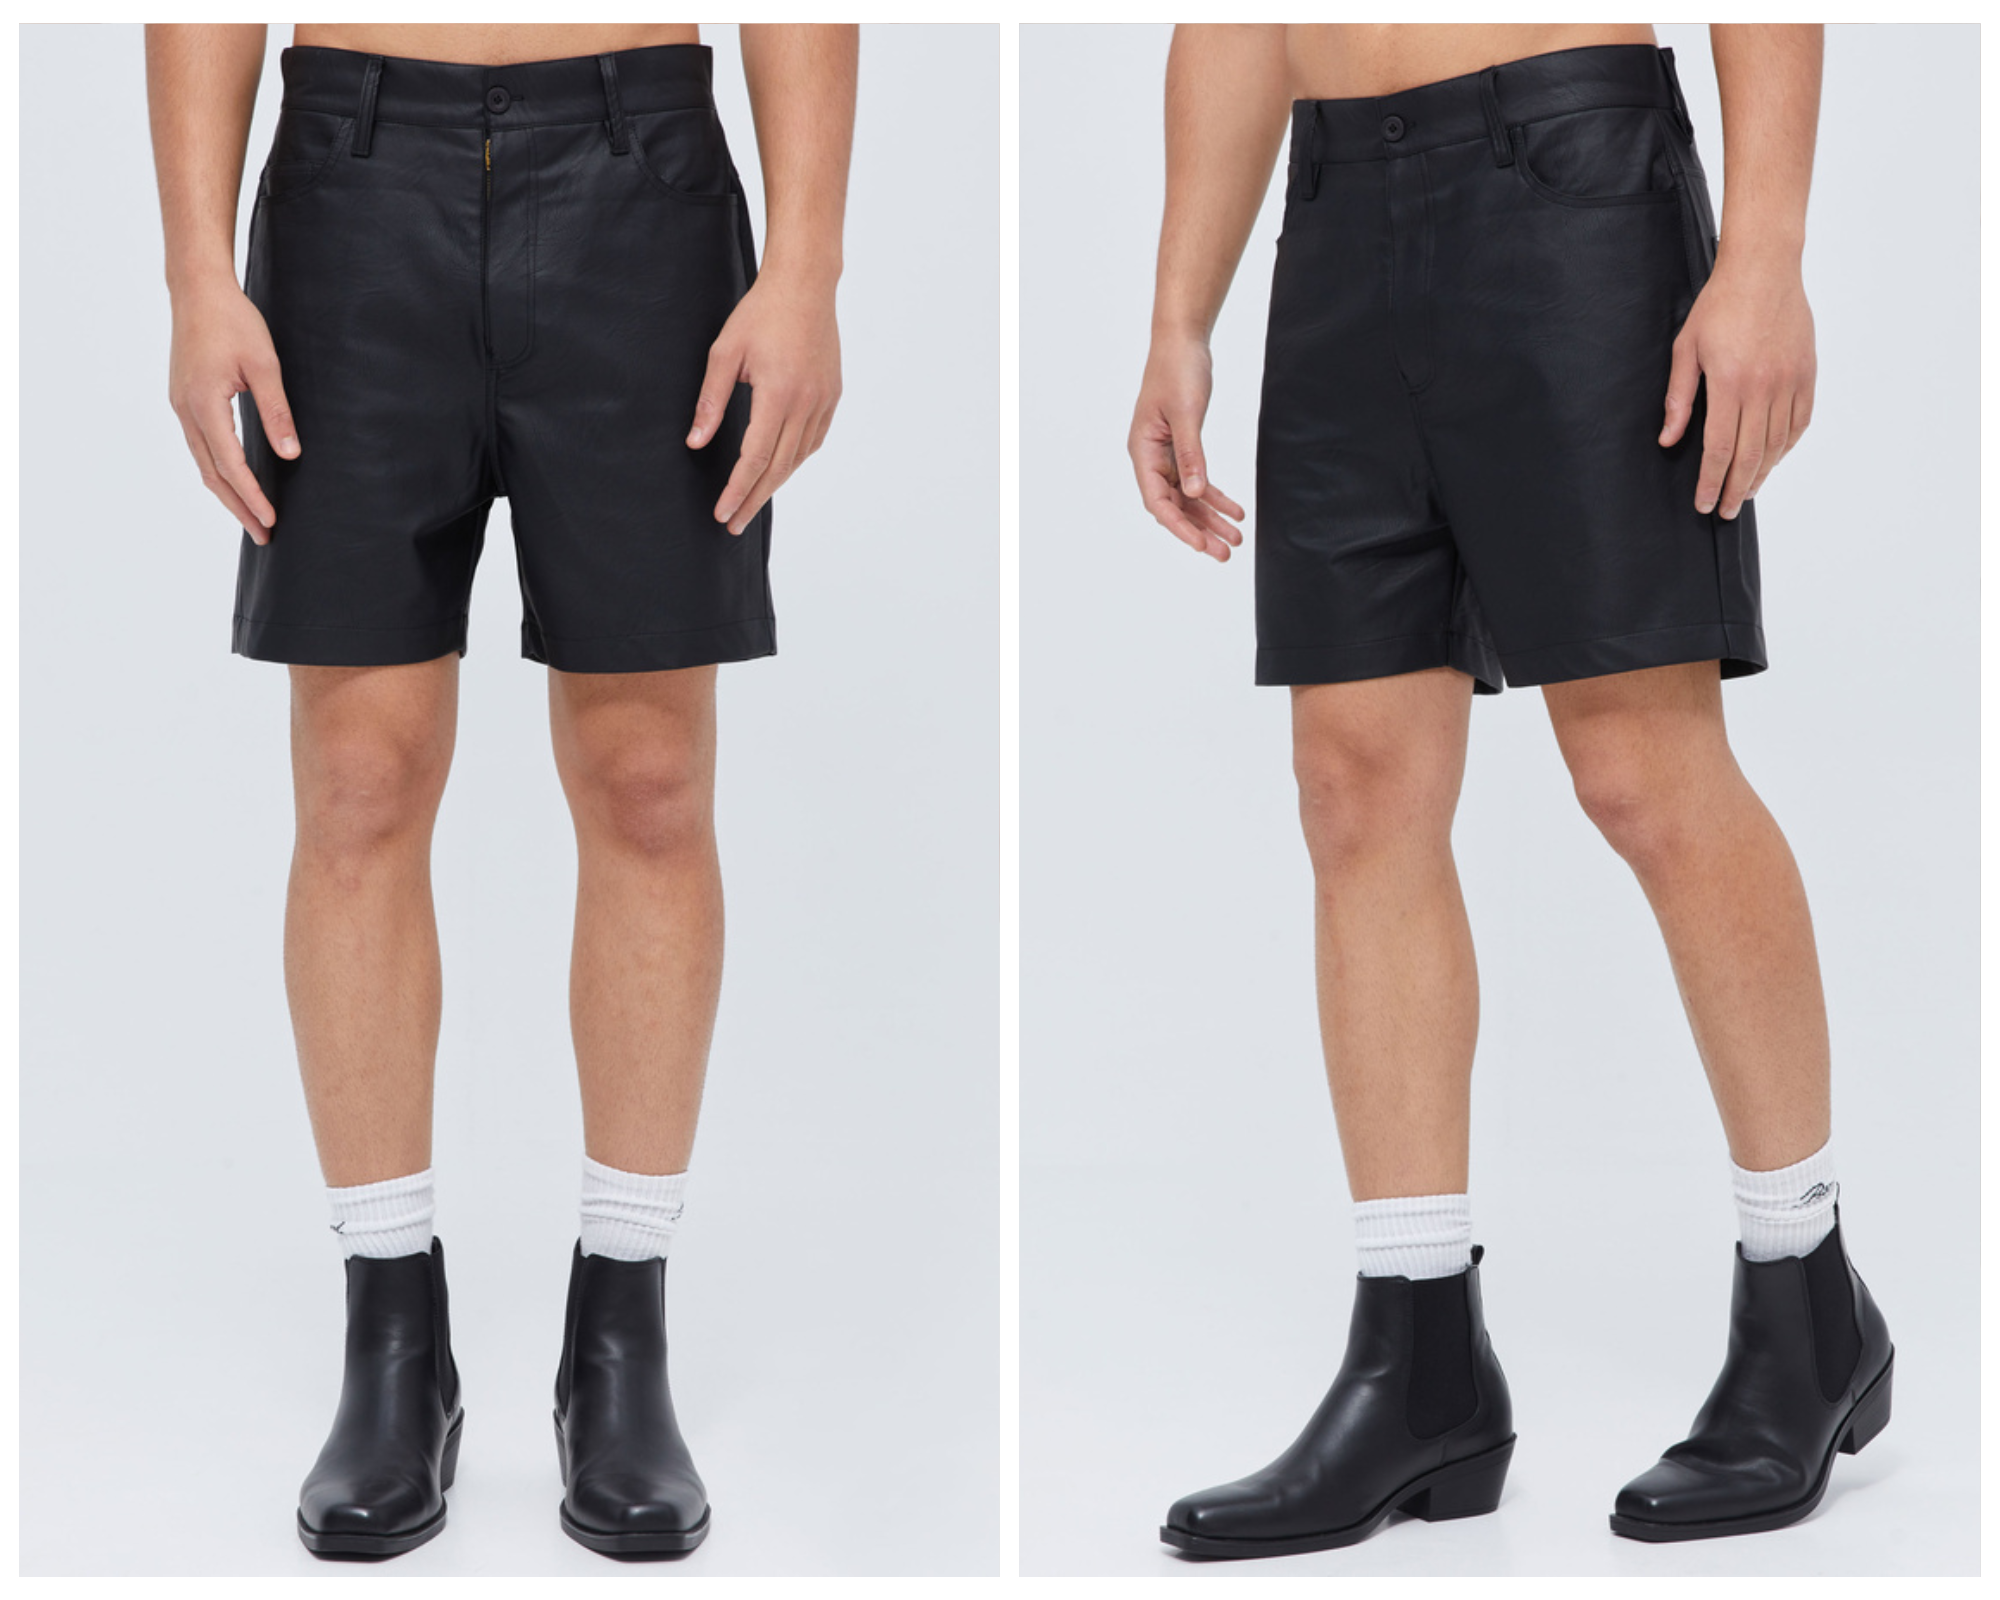 Unisex Shorts Black Vegan Leather In Relaxed Fit